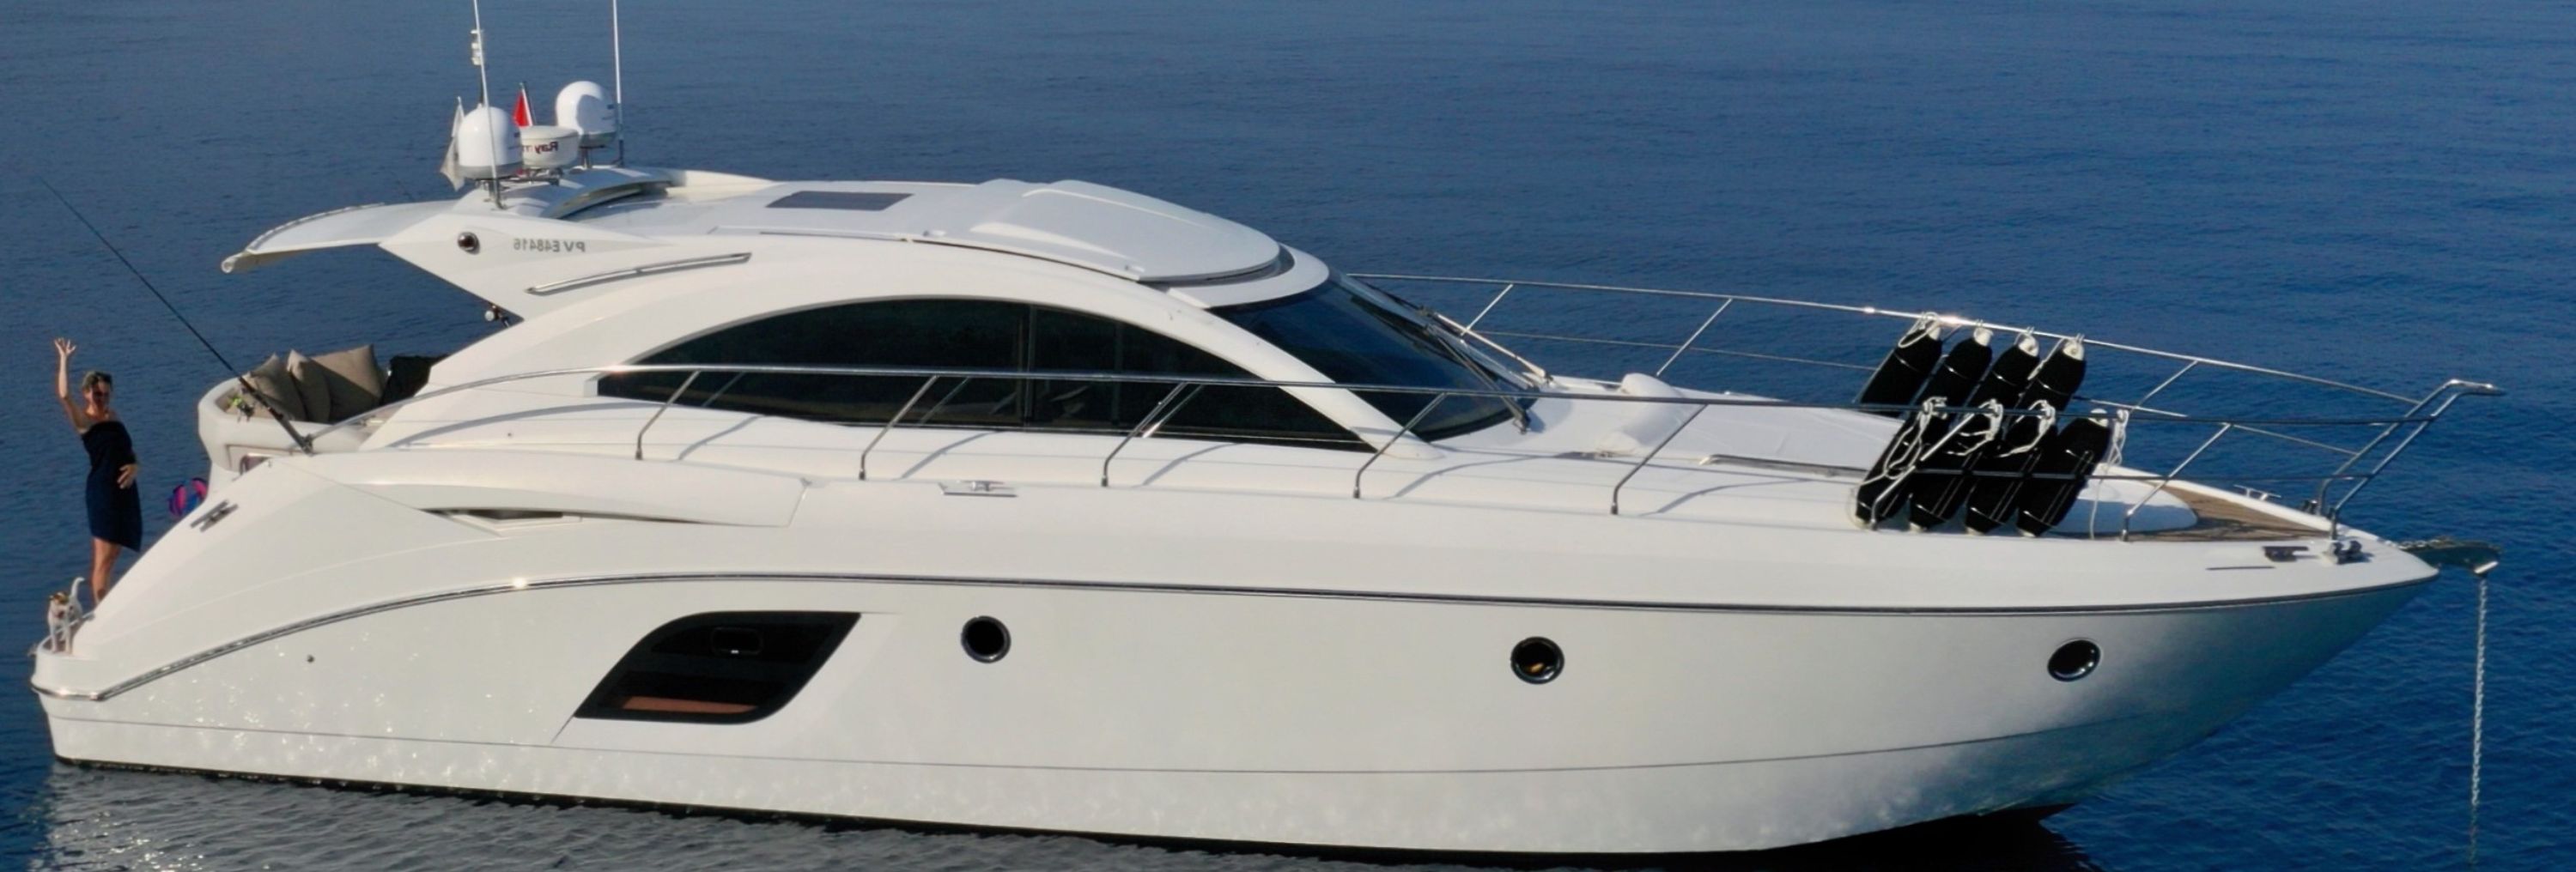 LEGEND OF PANAMA: New motoryacht for sale!